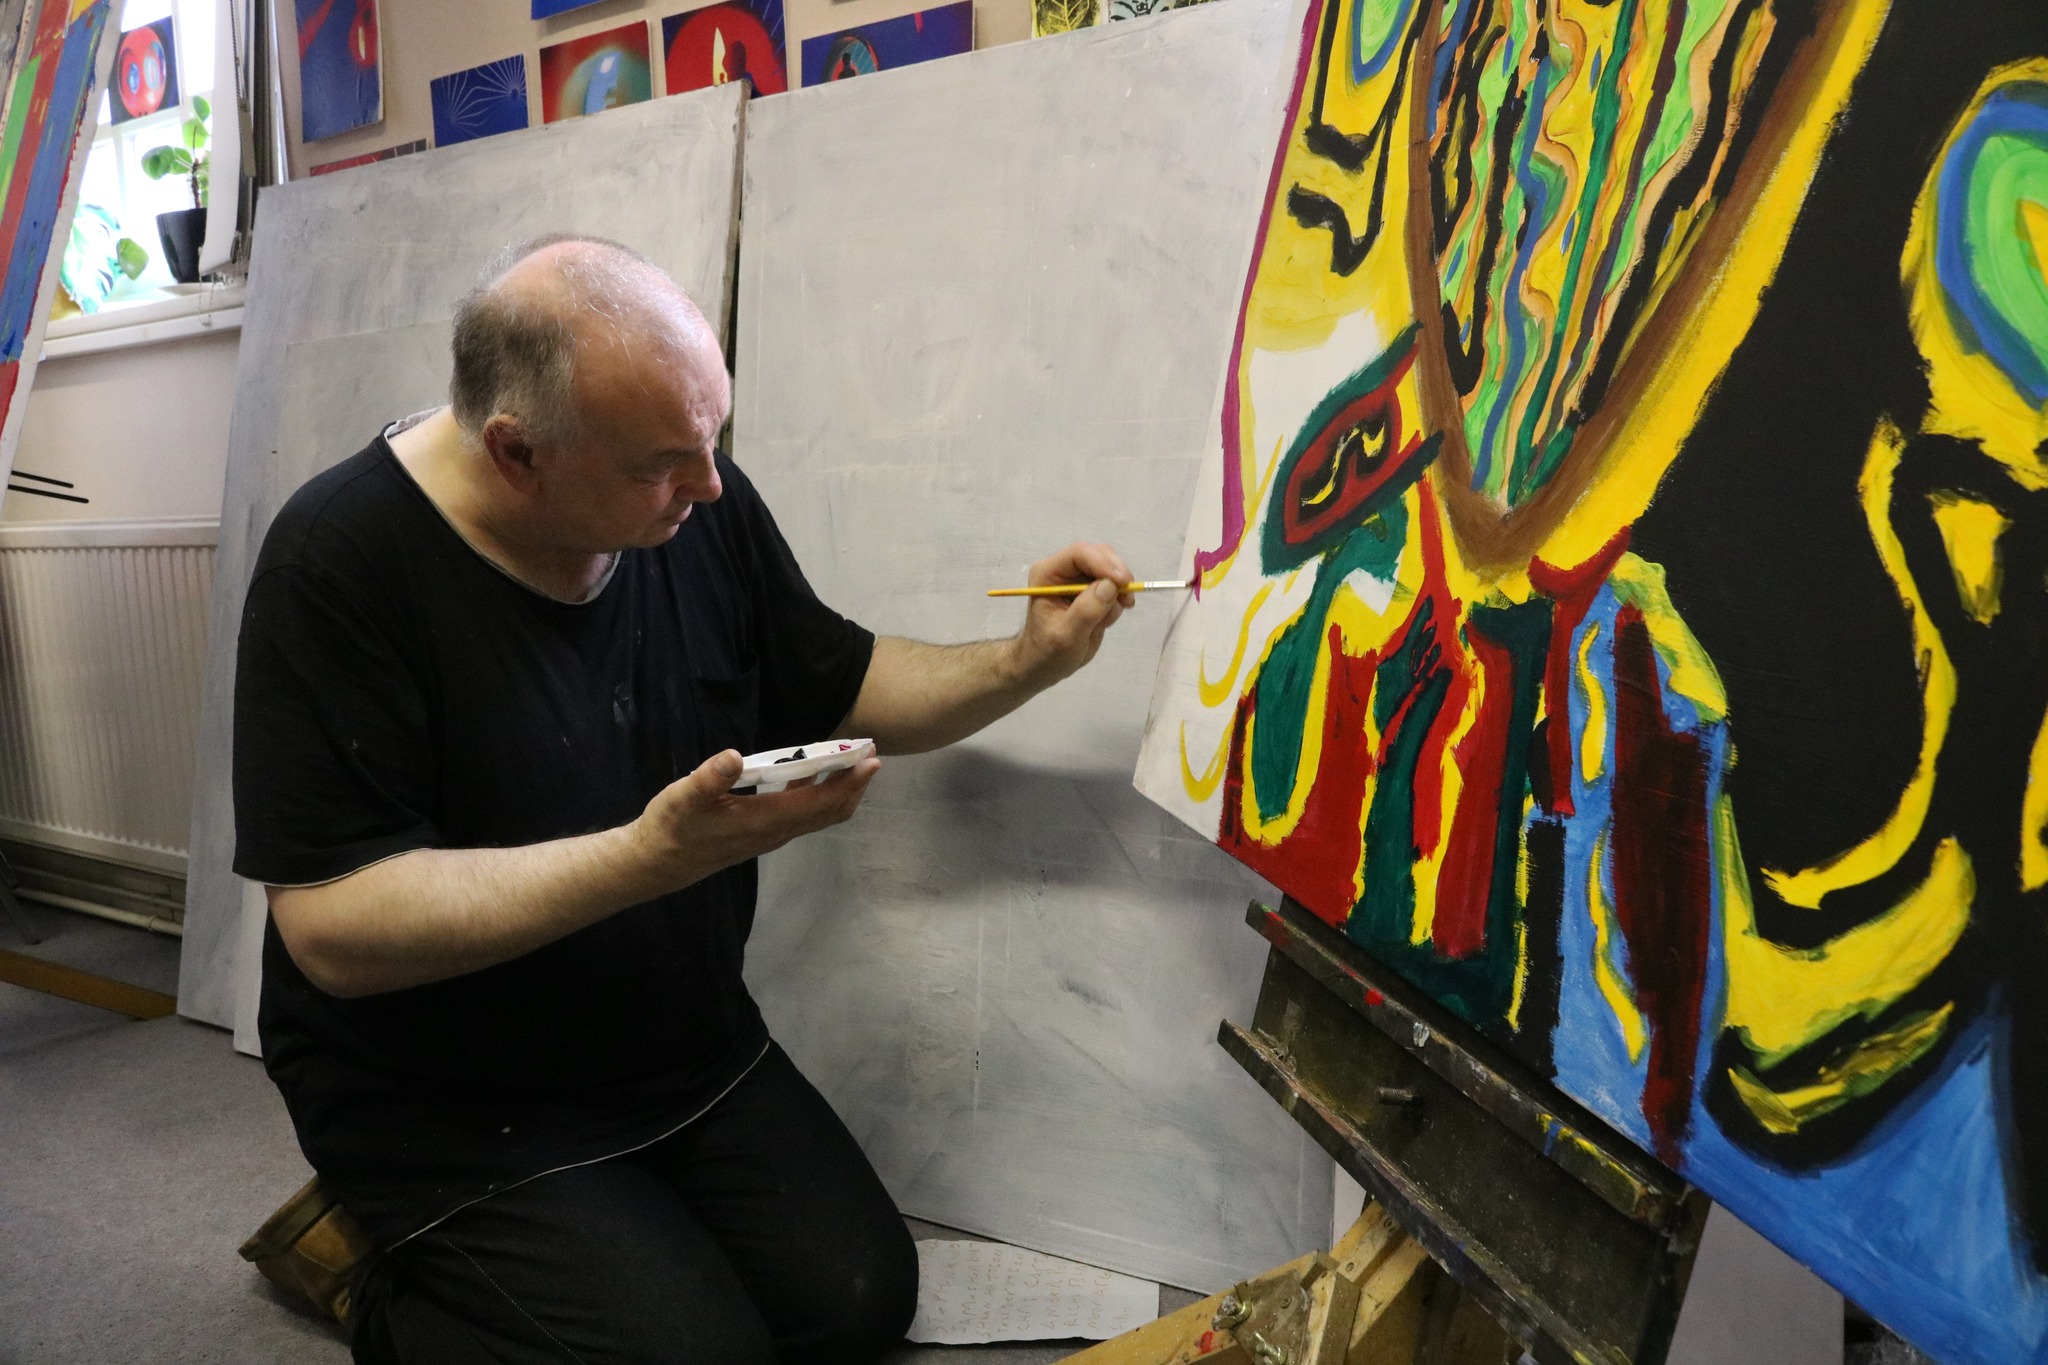 Patrick working on one of his pieces for the exhibition